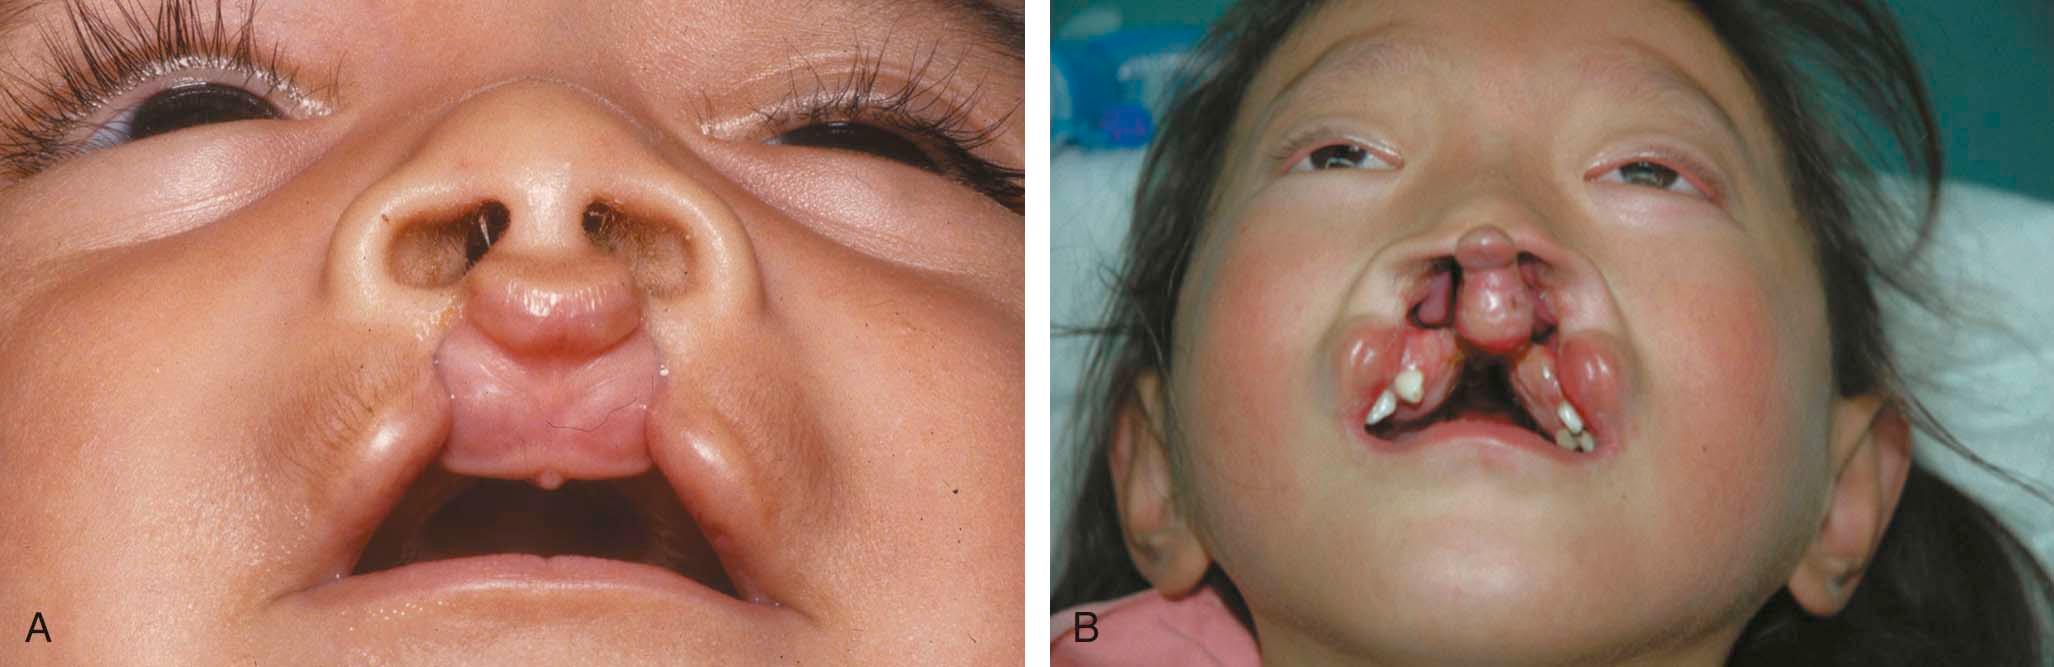 Figure 34-4, A, Basal view of a patient with incomplete bilateral cleft lip with good projection. B ,